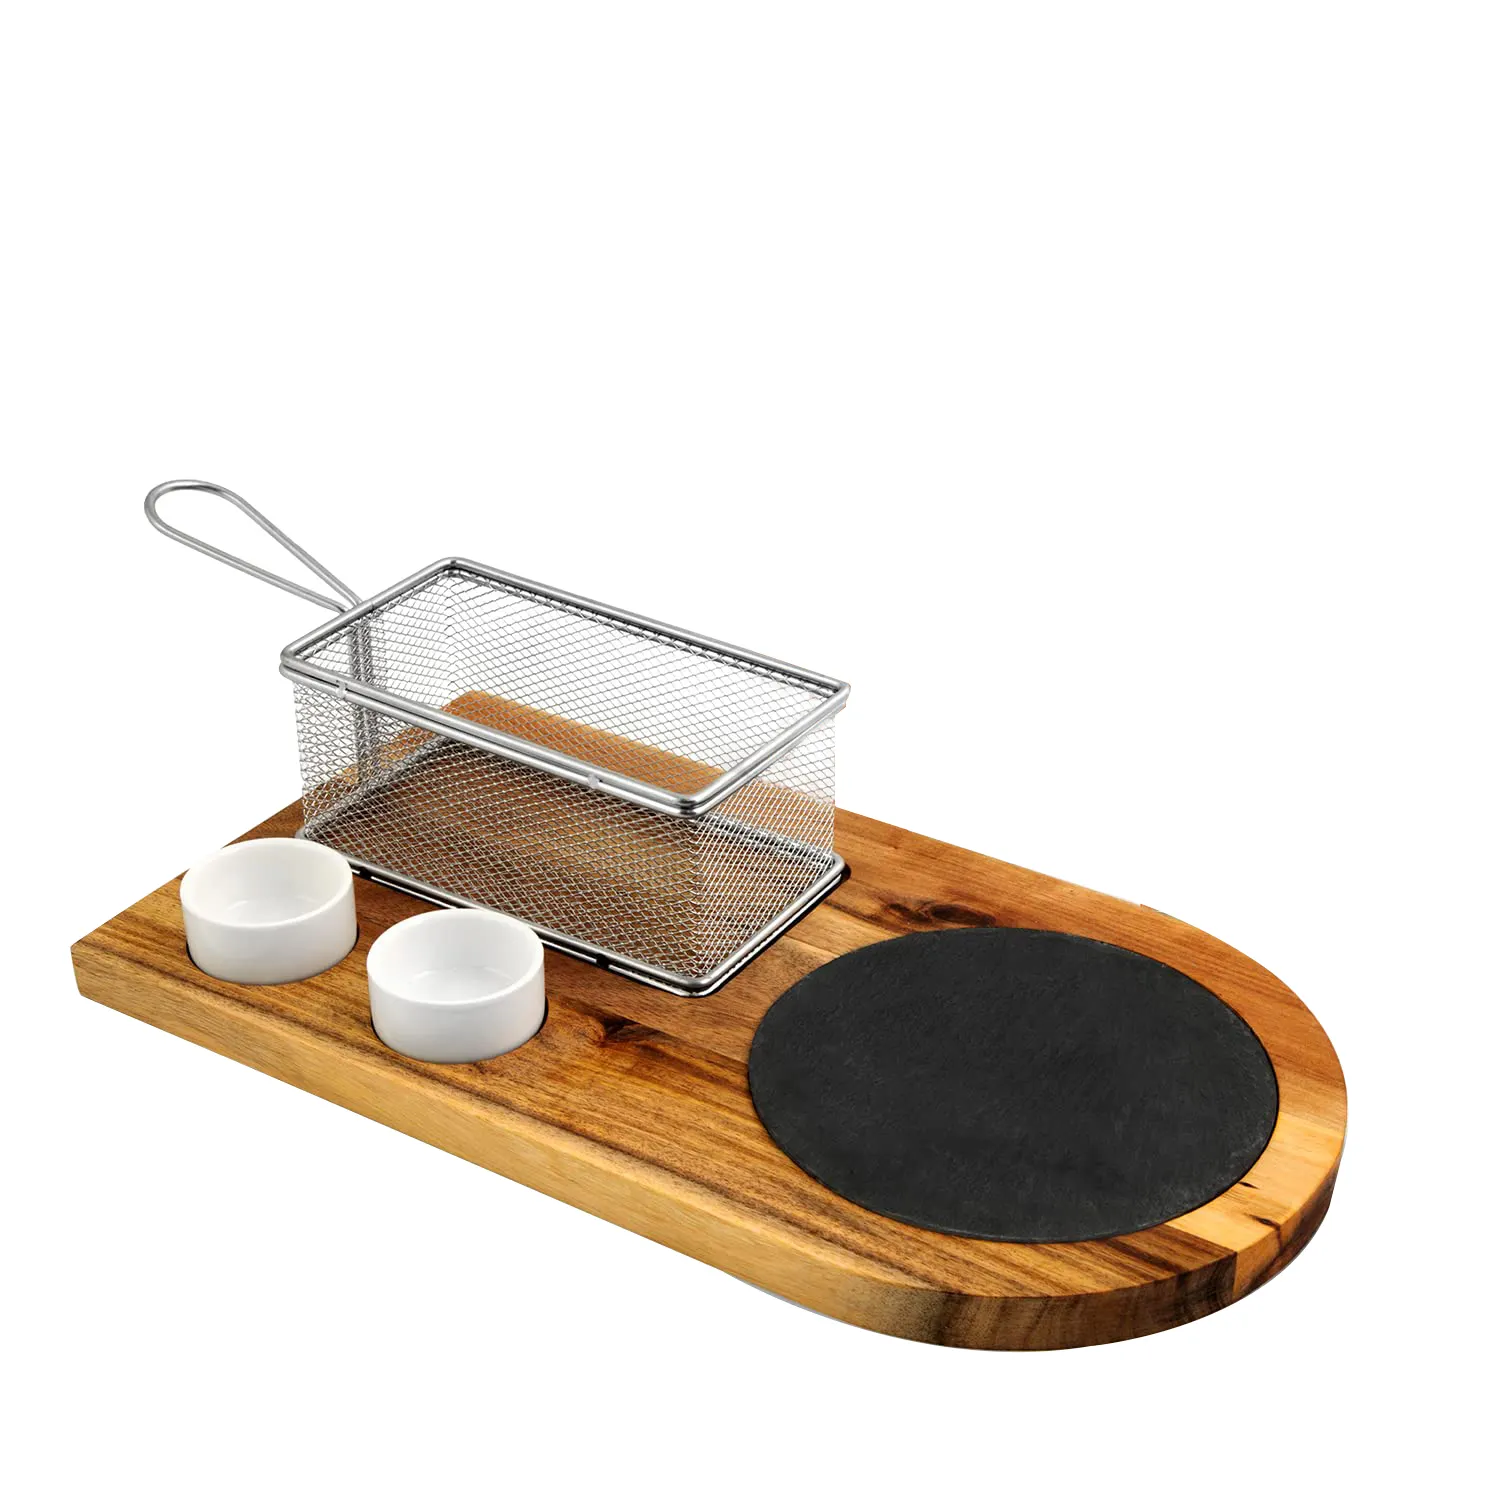 Wood Glory Burger Serving Set Includes Acacia Board With Slate Stainless Steel Fry Basket and Porcelain Condiment Cups